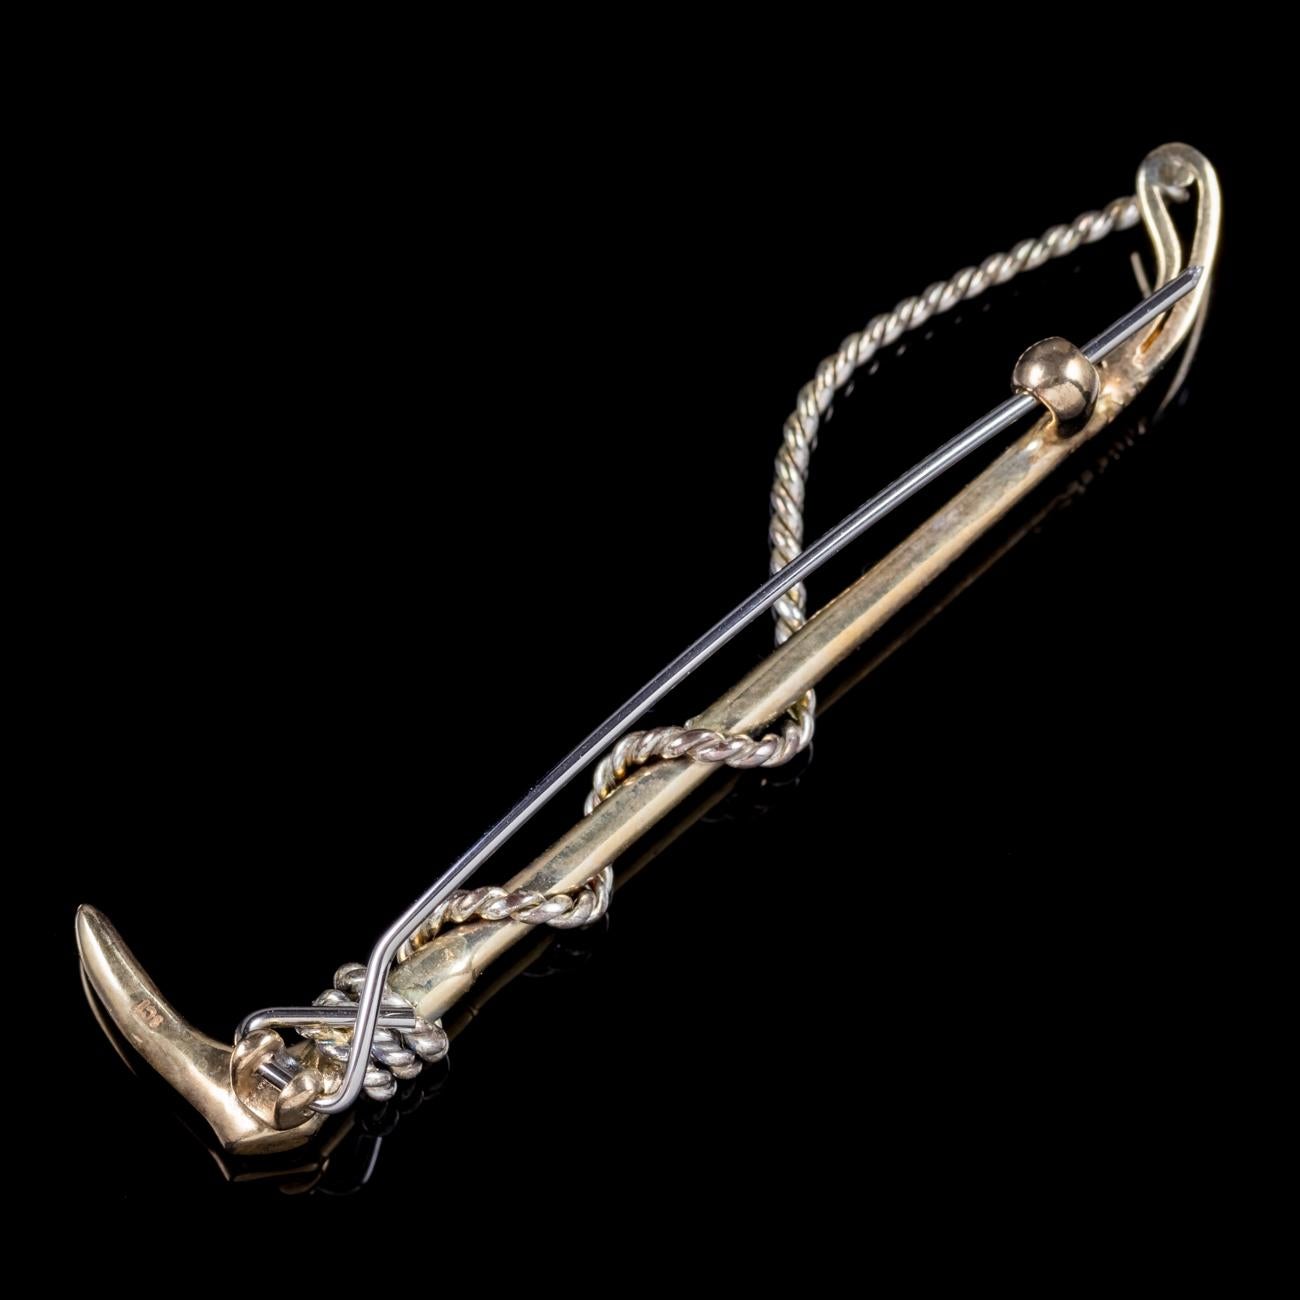 A splendid antique Victorian 9ct Yellow Gold brooch shaped like a riding crop with a wonderful rope twisting around the piece. Riding jewellery was popular in the Victorian era and was usually worn by women of social standing who partook in